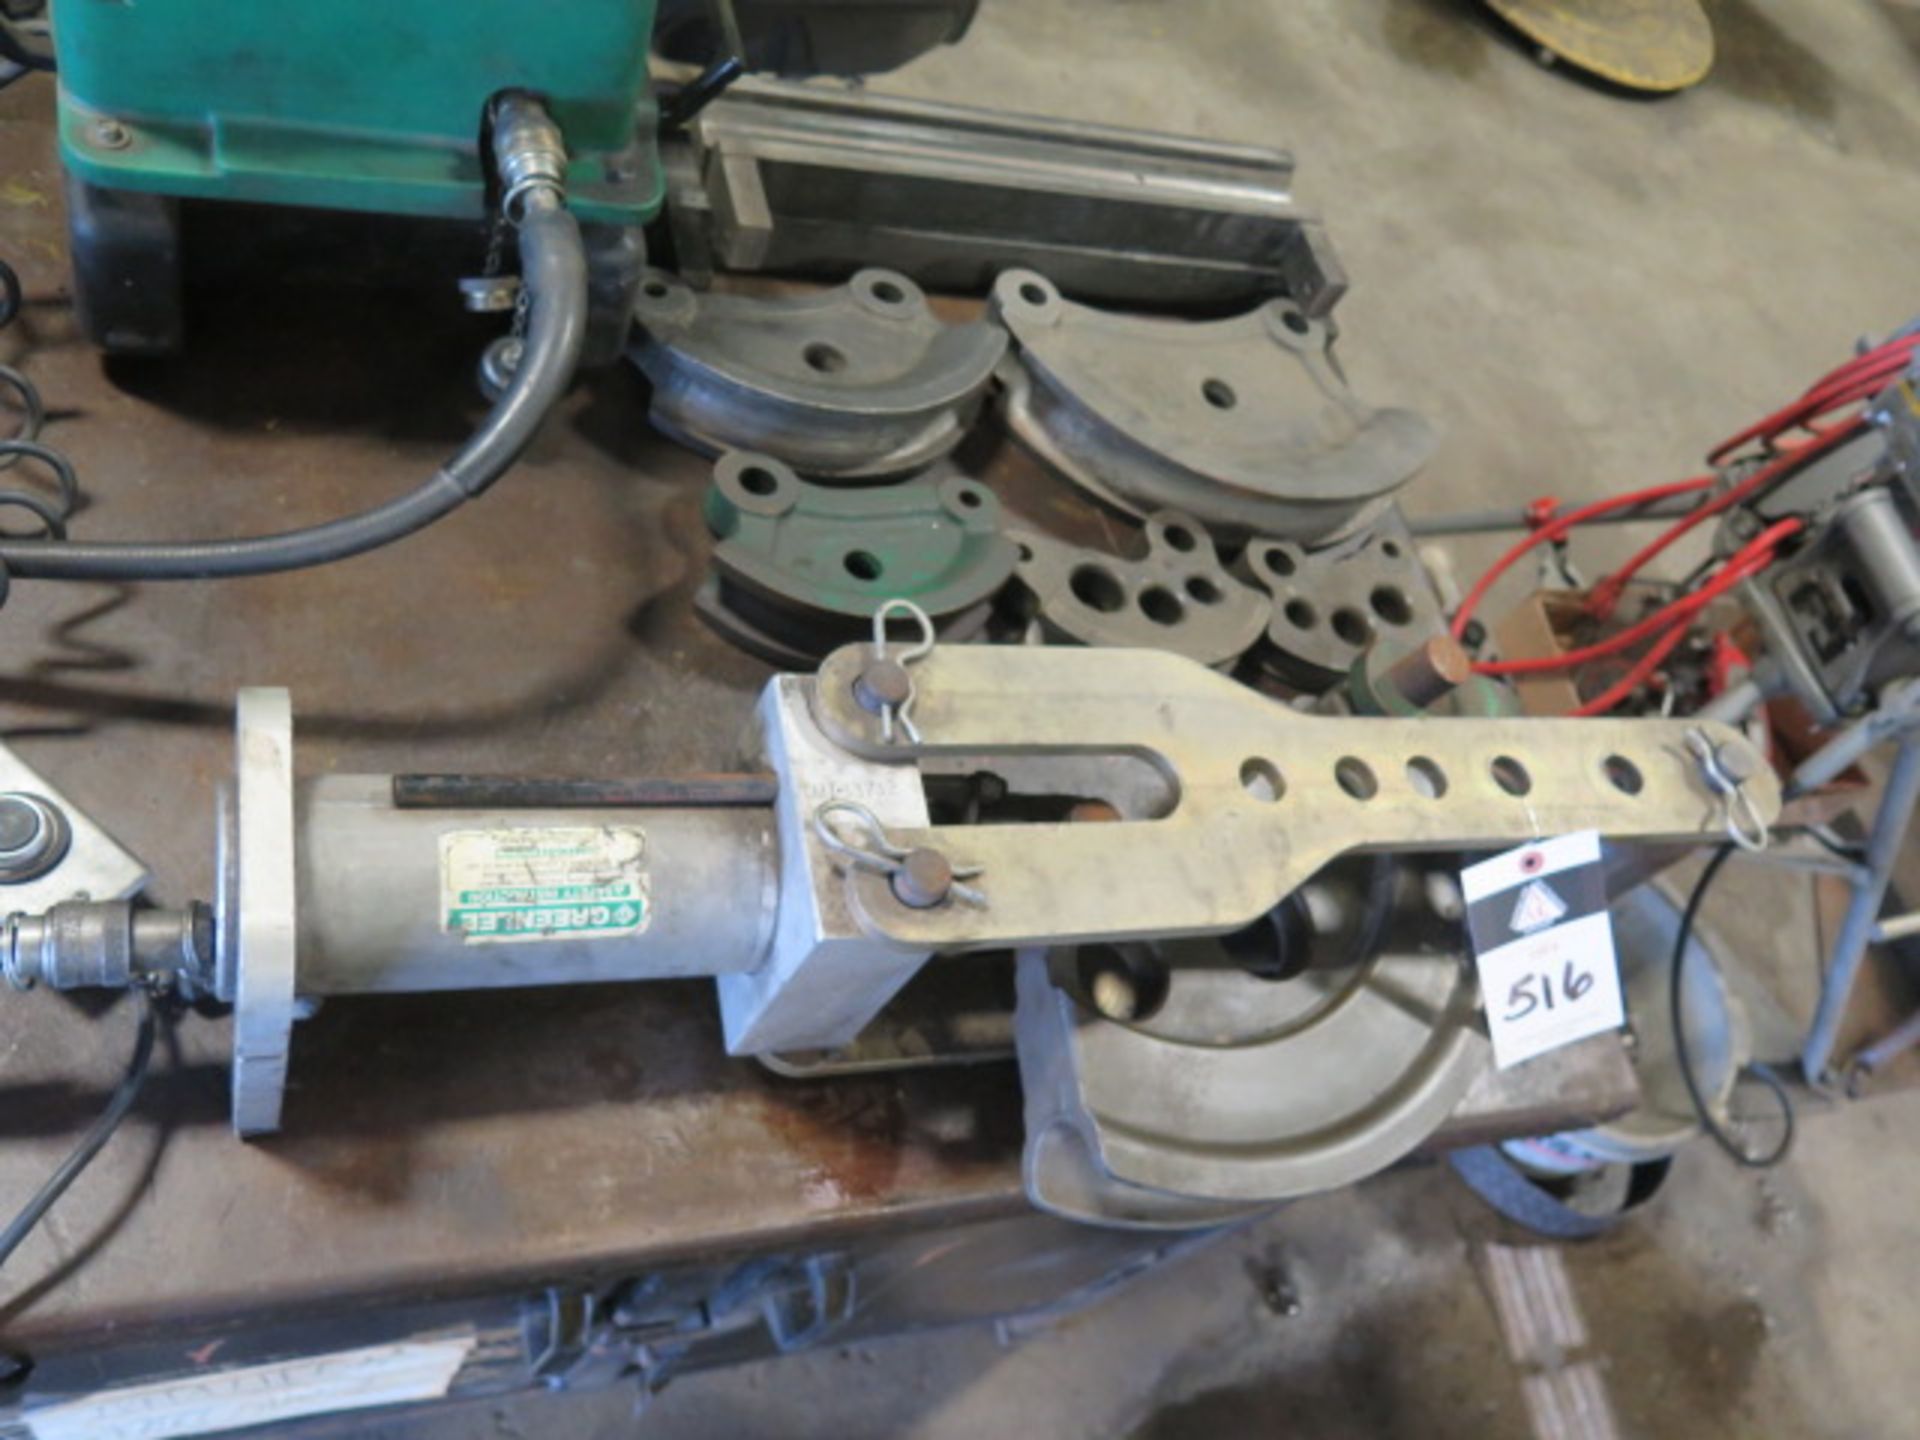 Greenlee Hydraulic Pipe Bender Set w/ Electric Hyd Power Unit, Bending Dies and Table SOLD AS IS - Image 3 of 11